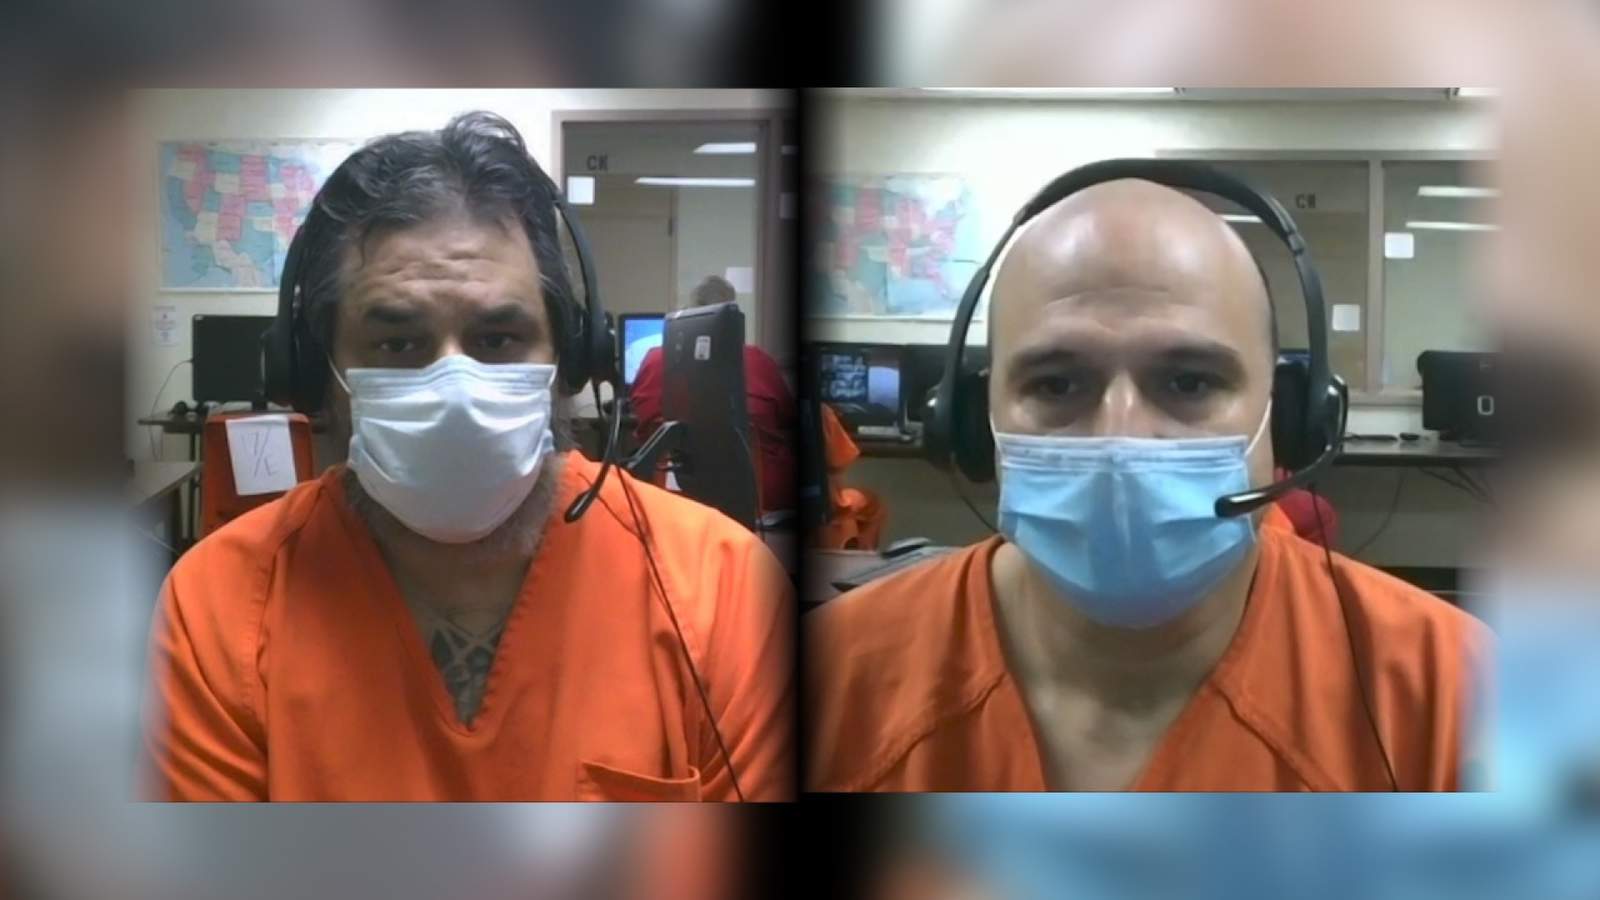 Actual innocence claim may be available to 2 TDCJ inmates freed on bond by San Antonio judge